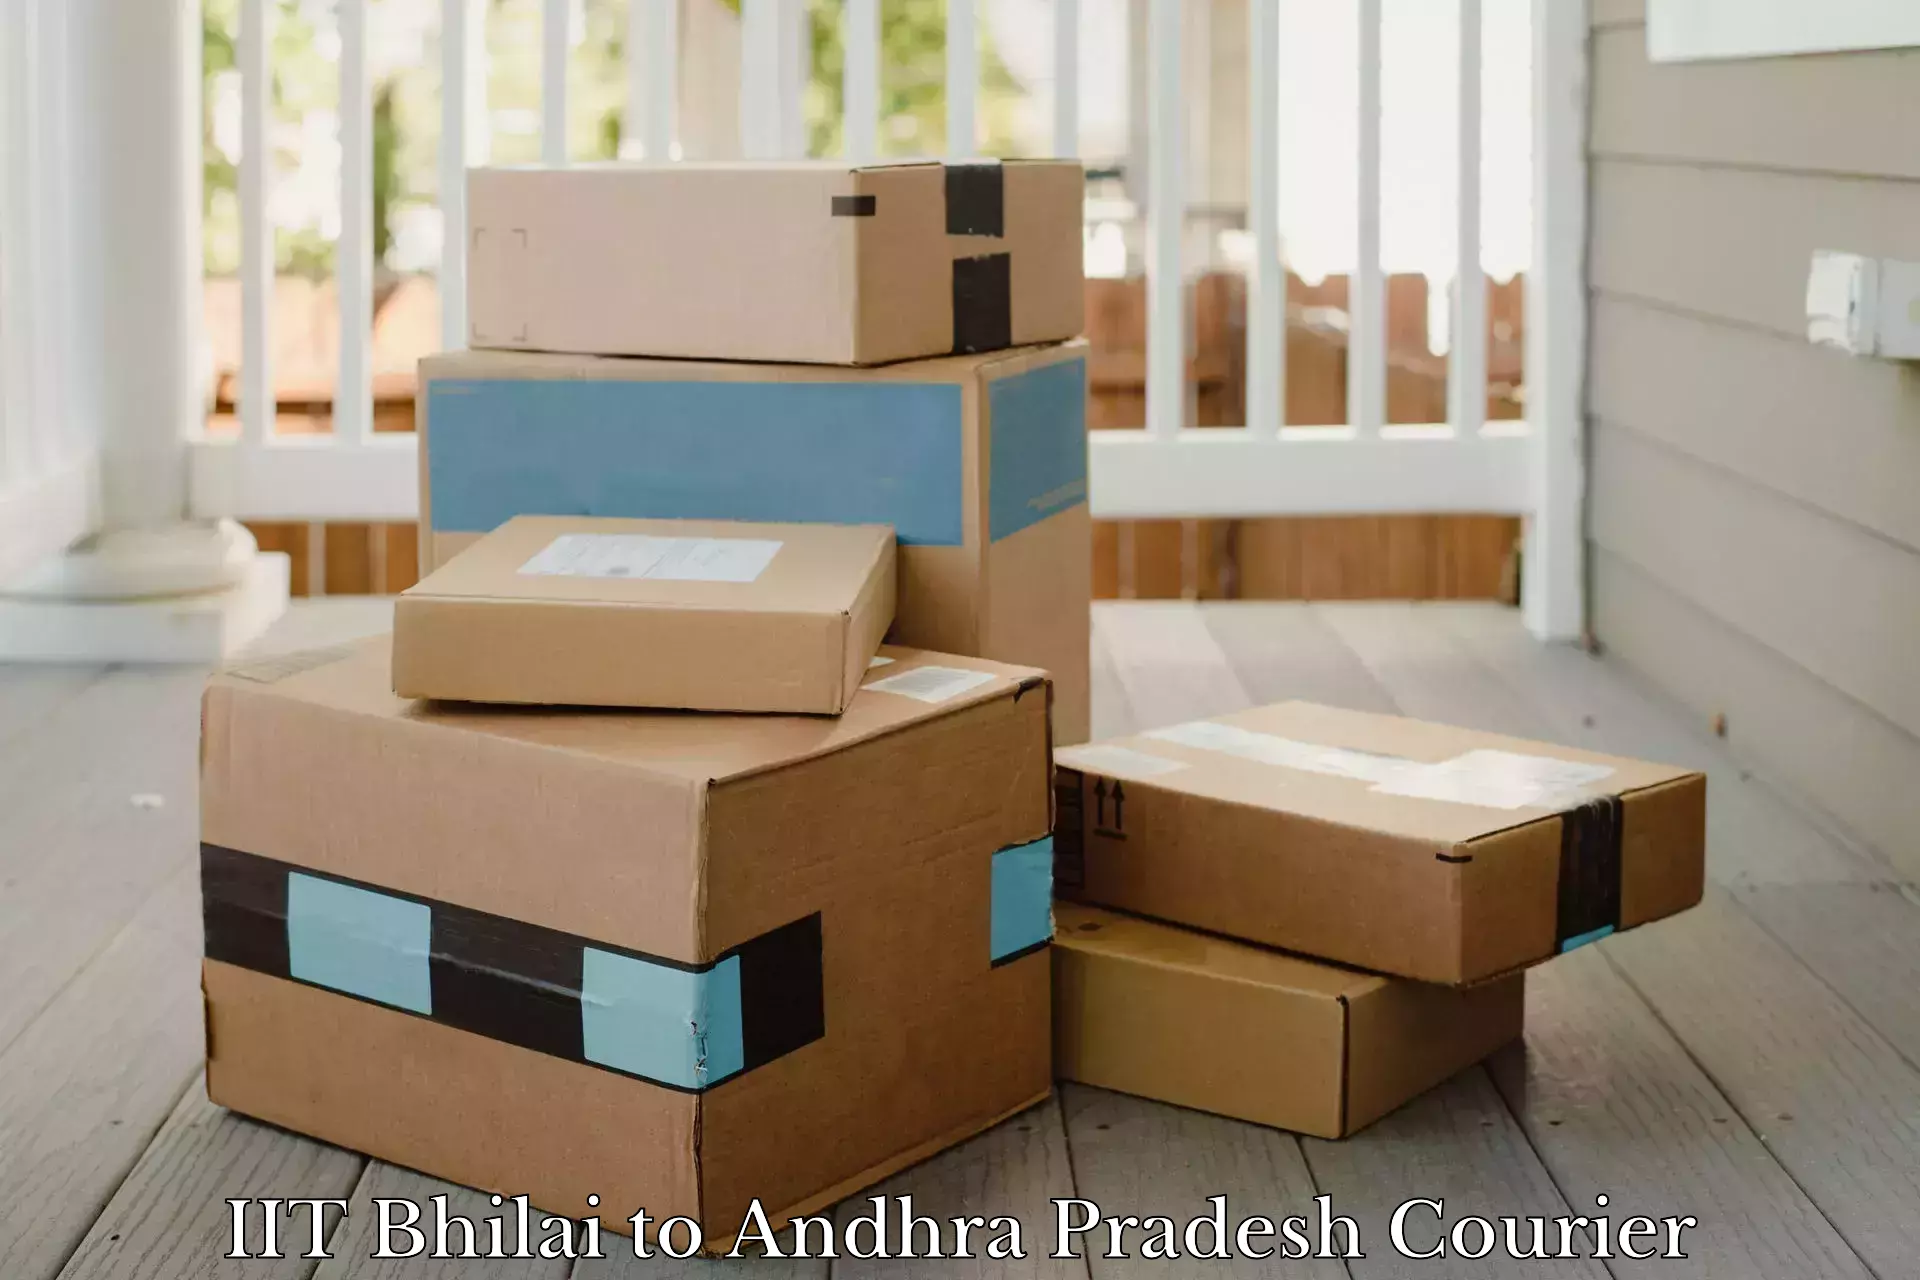 Personal courier services IIT Bhilai to Andhra Pradesh